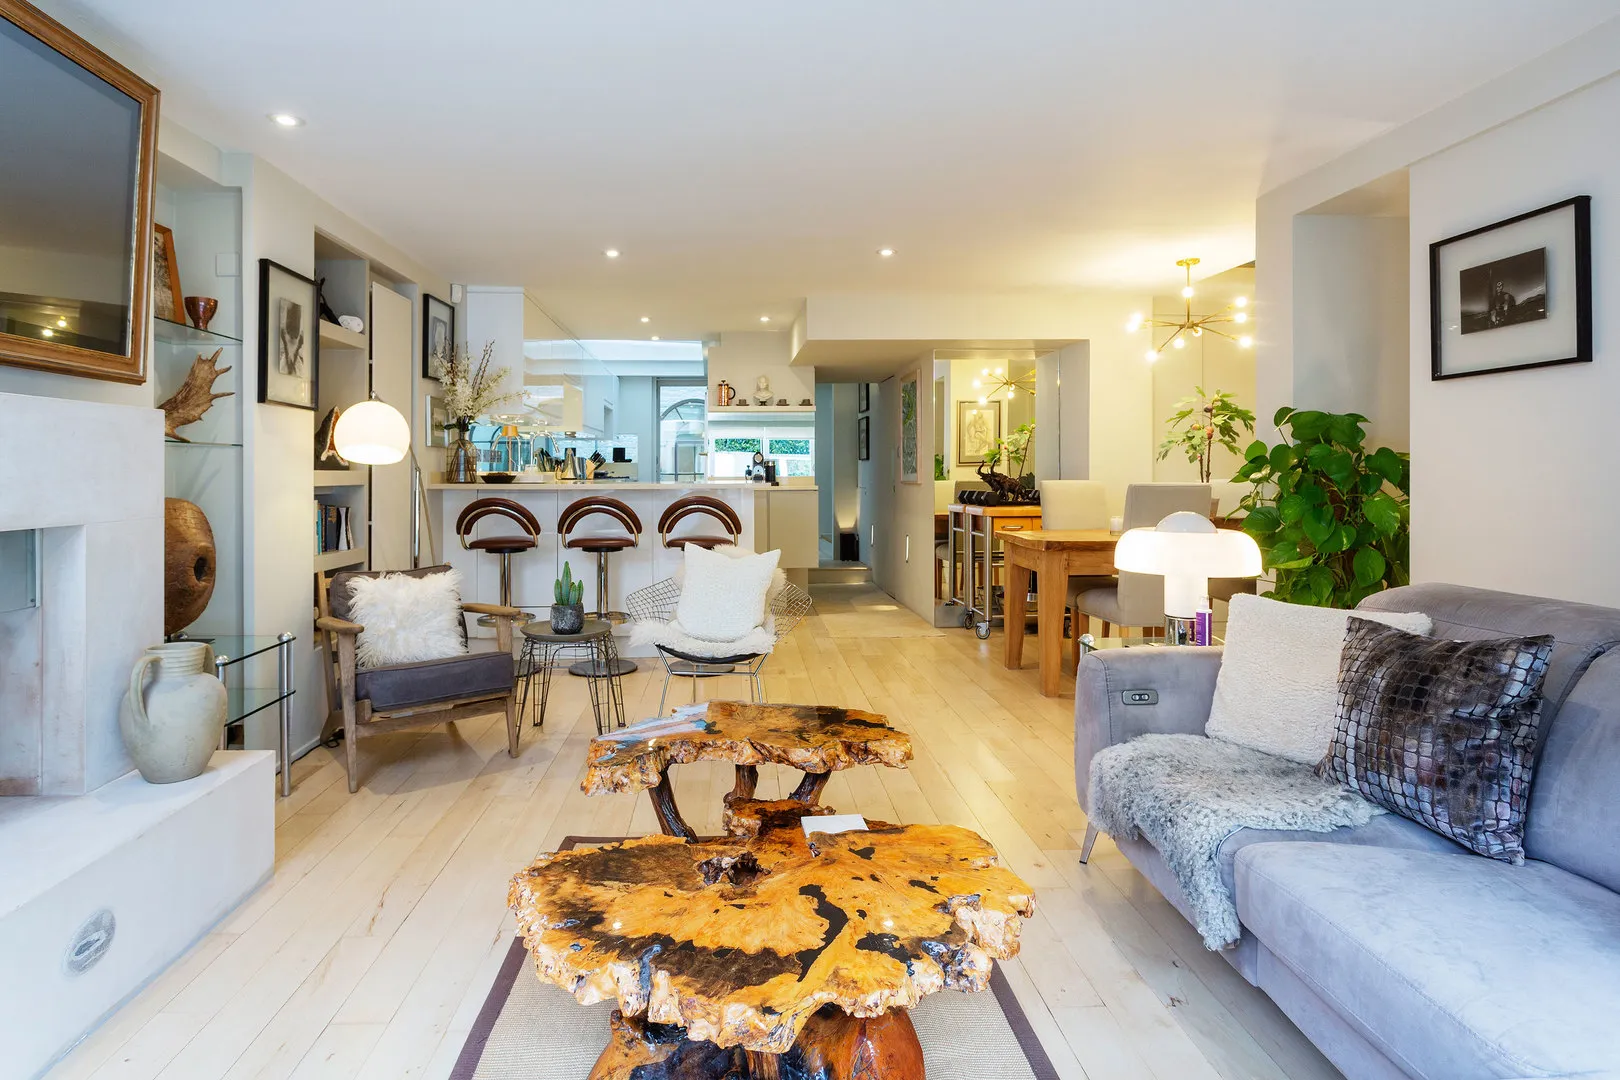 Artesian Road, holiday home in Notting Hill, London